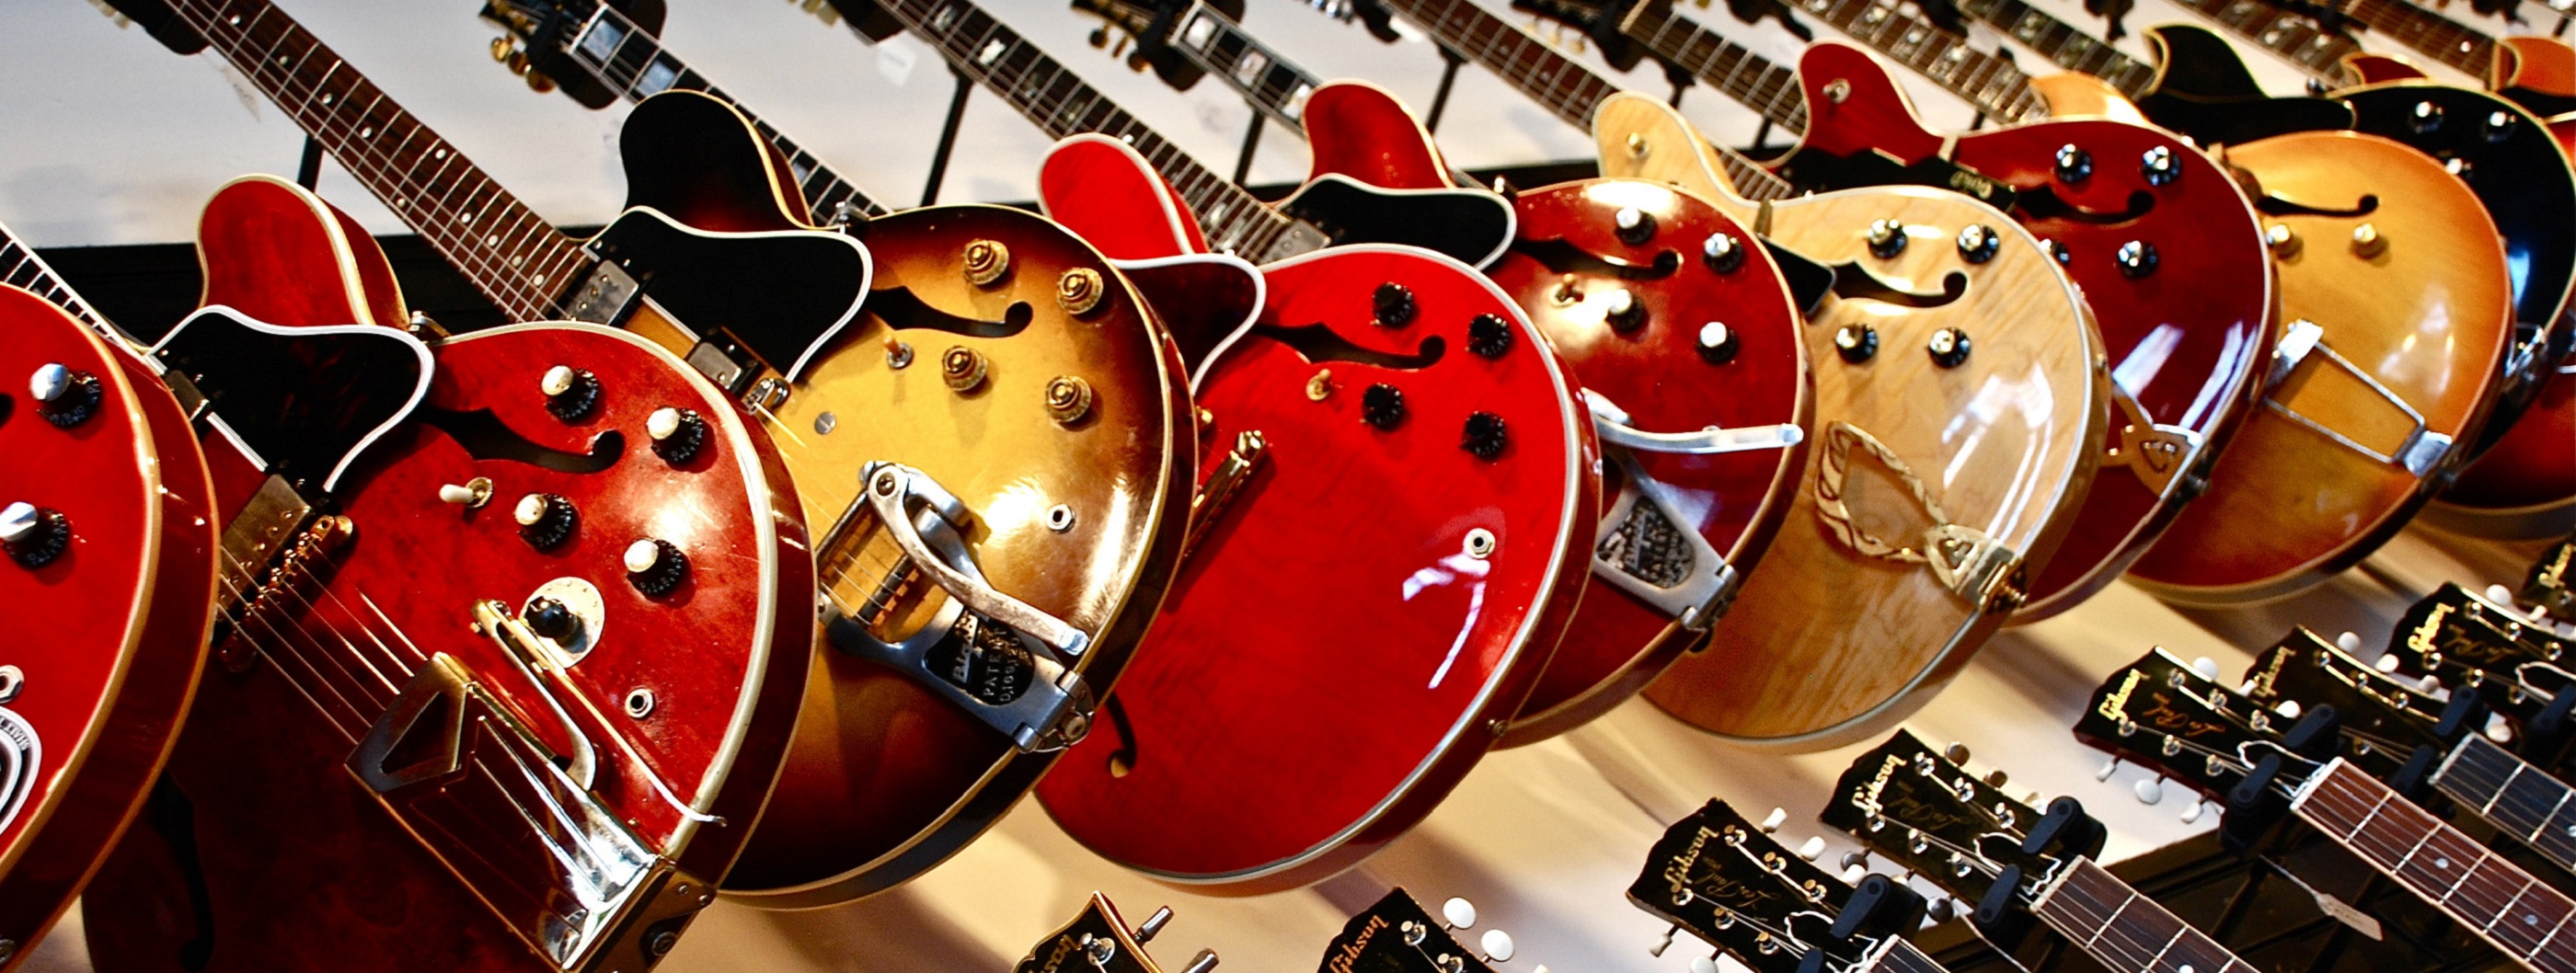 Red and gold coloured Gibson guitars hanging in a row on a wall